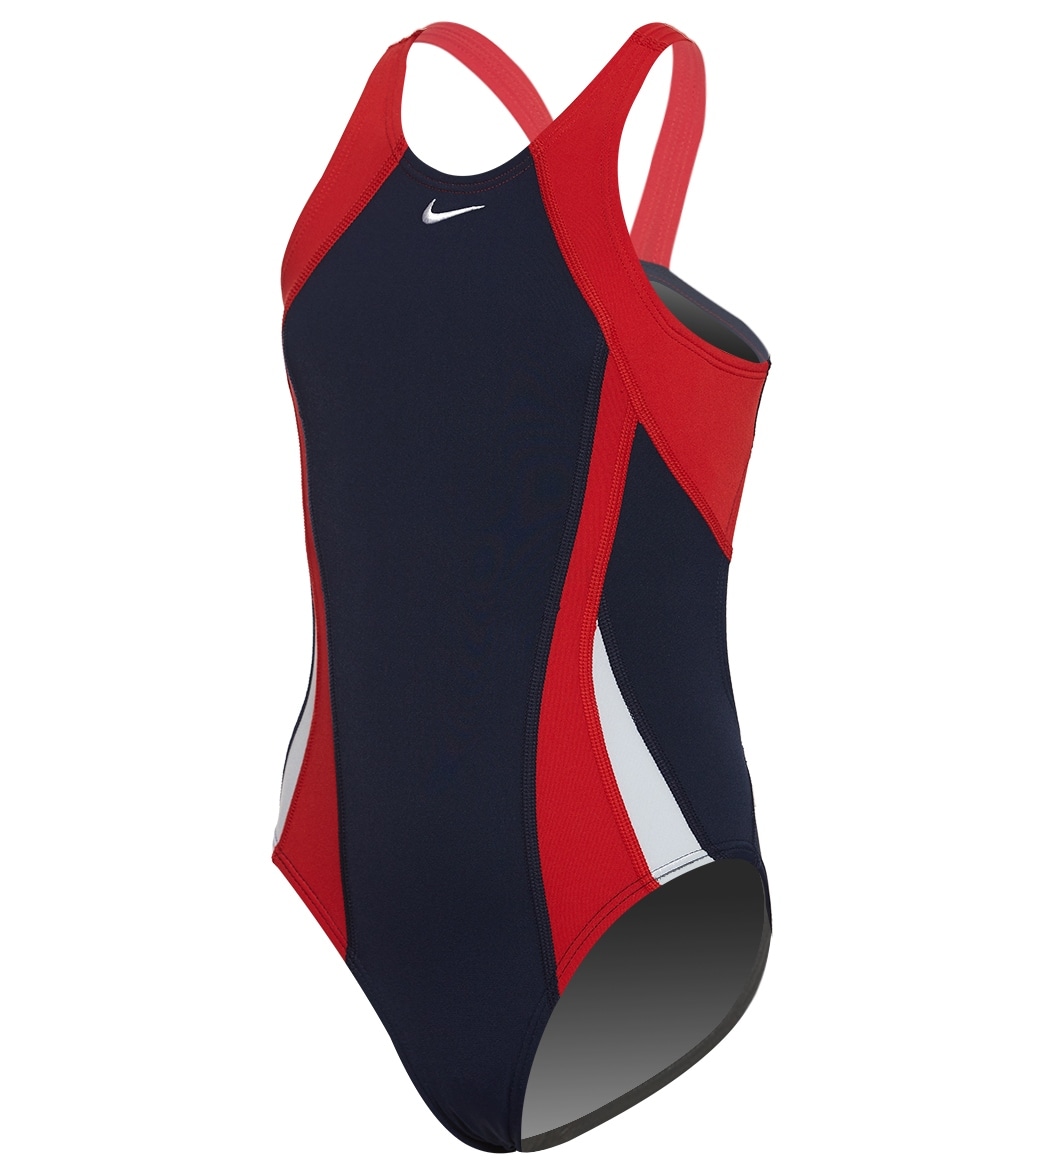 Nike Girls' Color Surge Fastback One Piece Swimsuit - Red/Navy 20 Polyester/Pbt - Swimoutlet.com